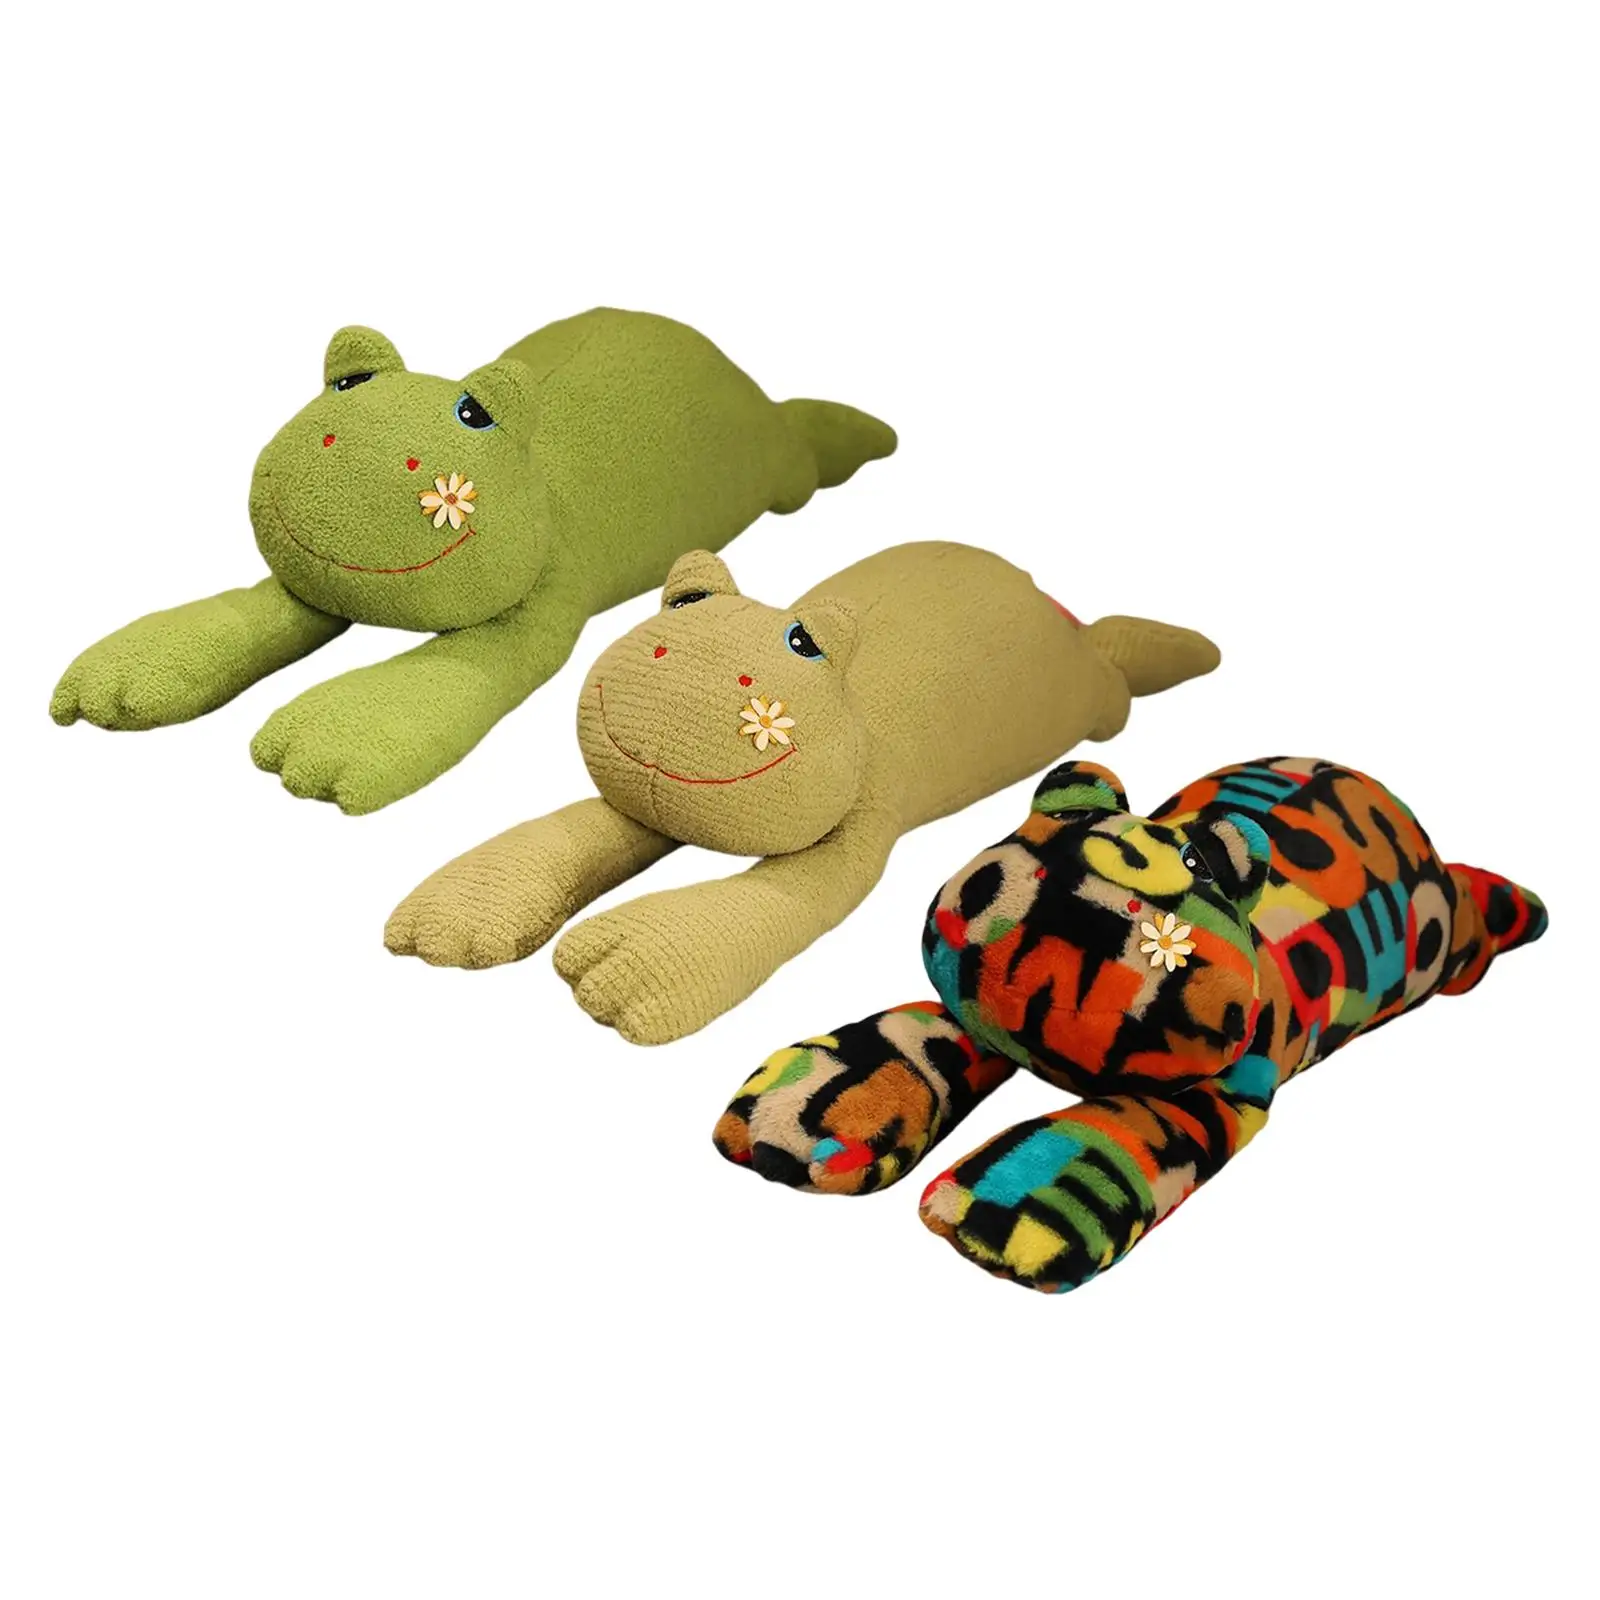 

Cuddly Frog Plush Toy Frog pillow Home Decoration Cute Stuffed Animal for Party Toddlers Children Kids Girlfriend